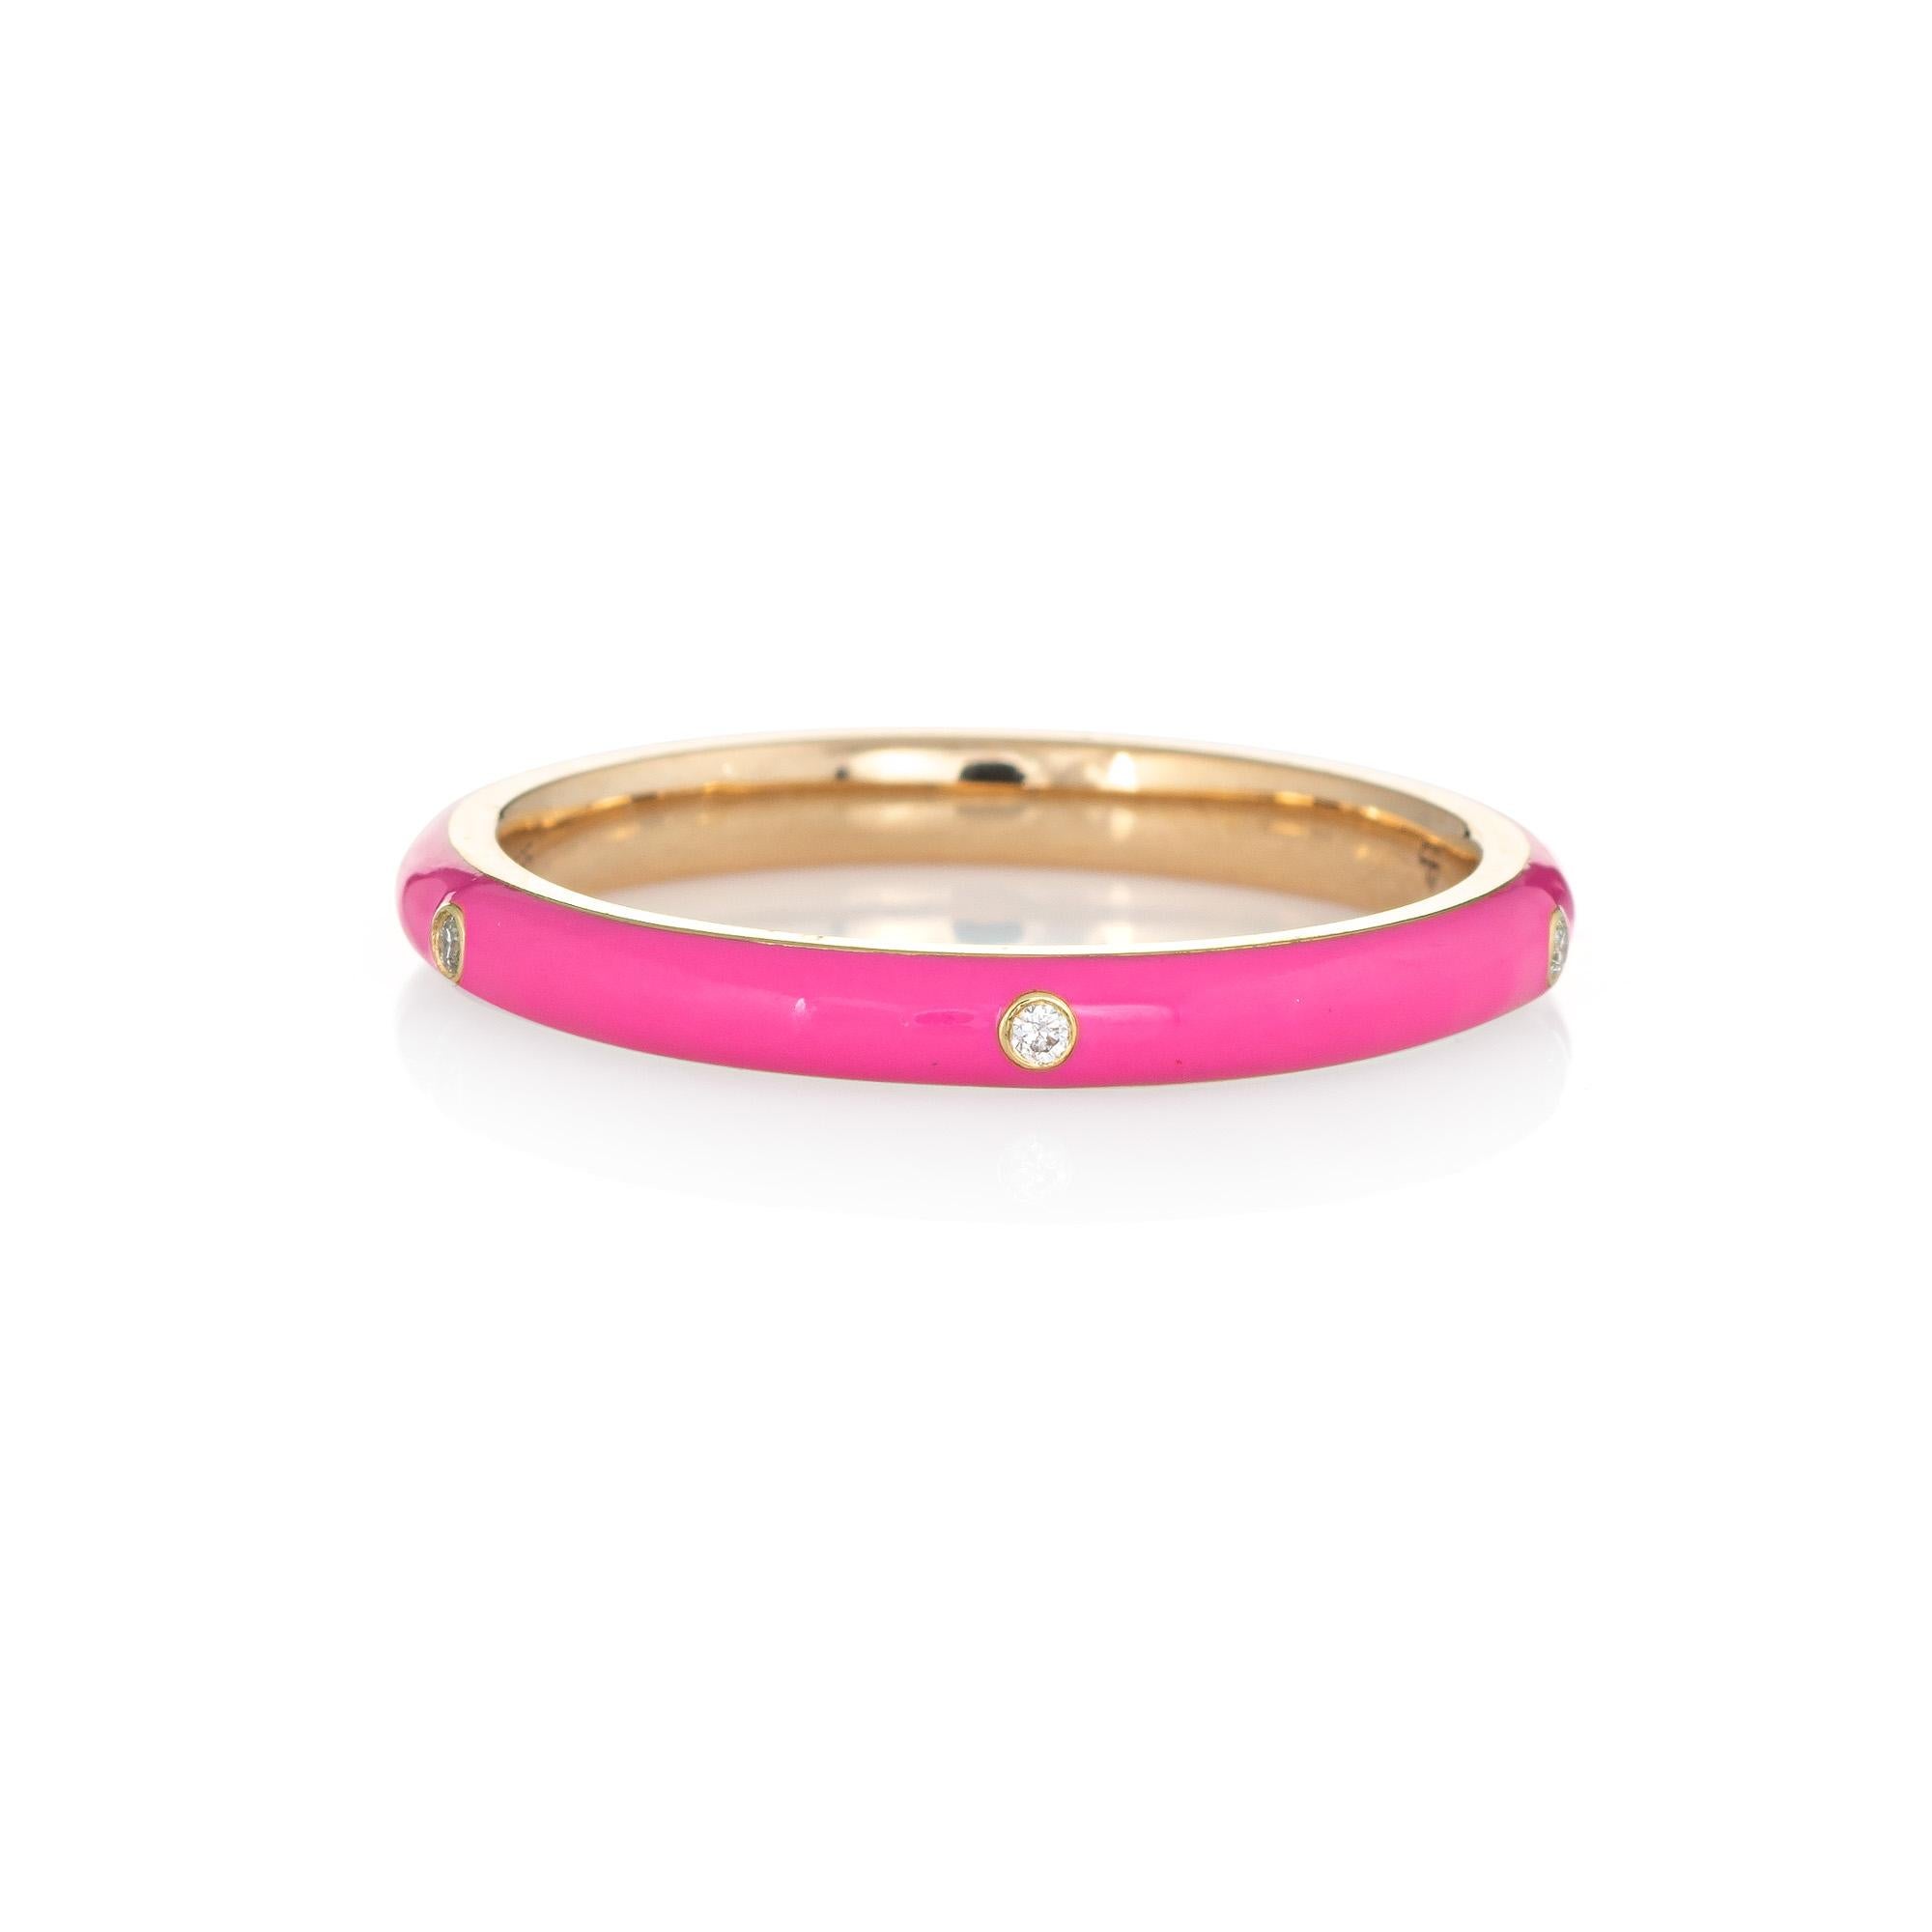 Stylish candy pink enamel & diamond stacking band crafted in 14 karat yellow gold. 

5 round brilliant cut diamonds total an estimated 0.03 carats (estimated at H-I color and SI2-I1 clarity). 

The enameled band is a striking candy pink color with 5